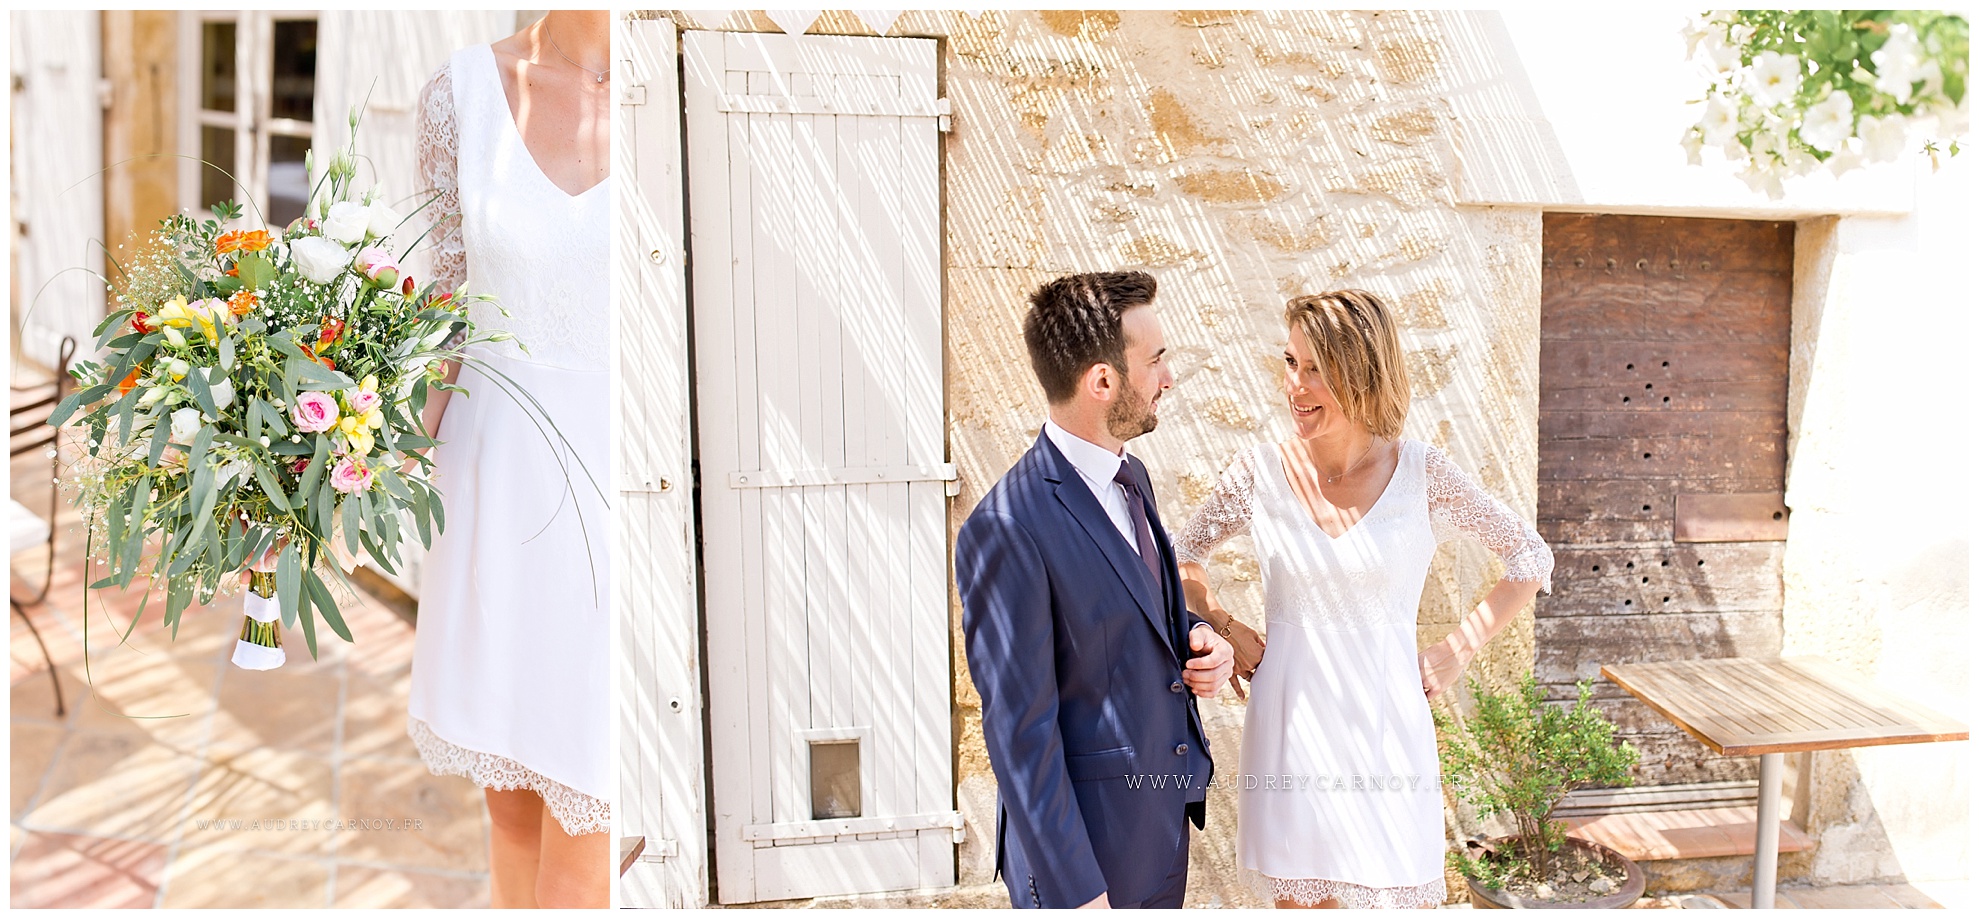 Mariage Pertuis | Laurence & Anthony 7